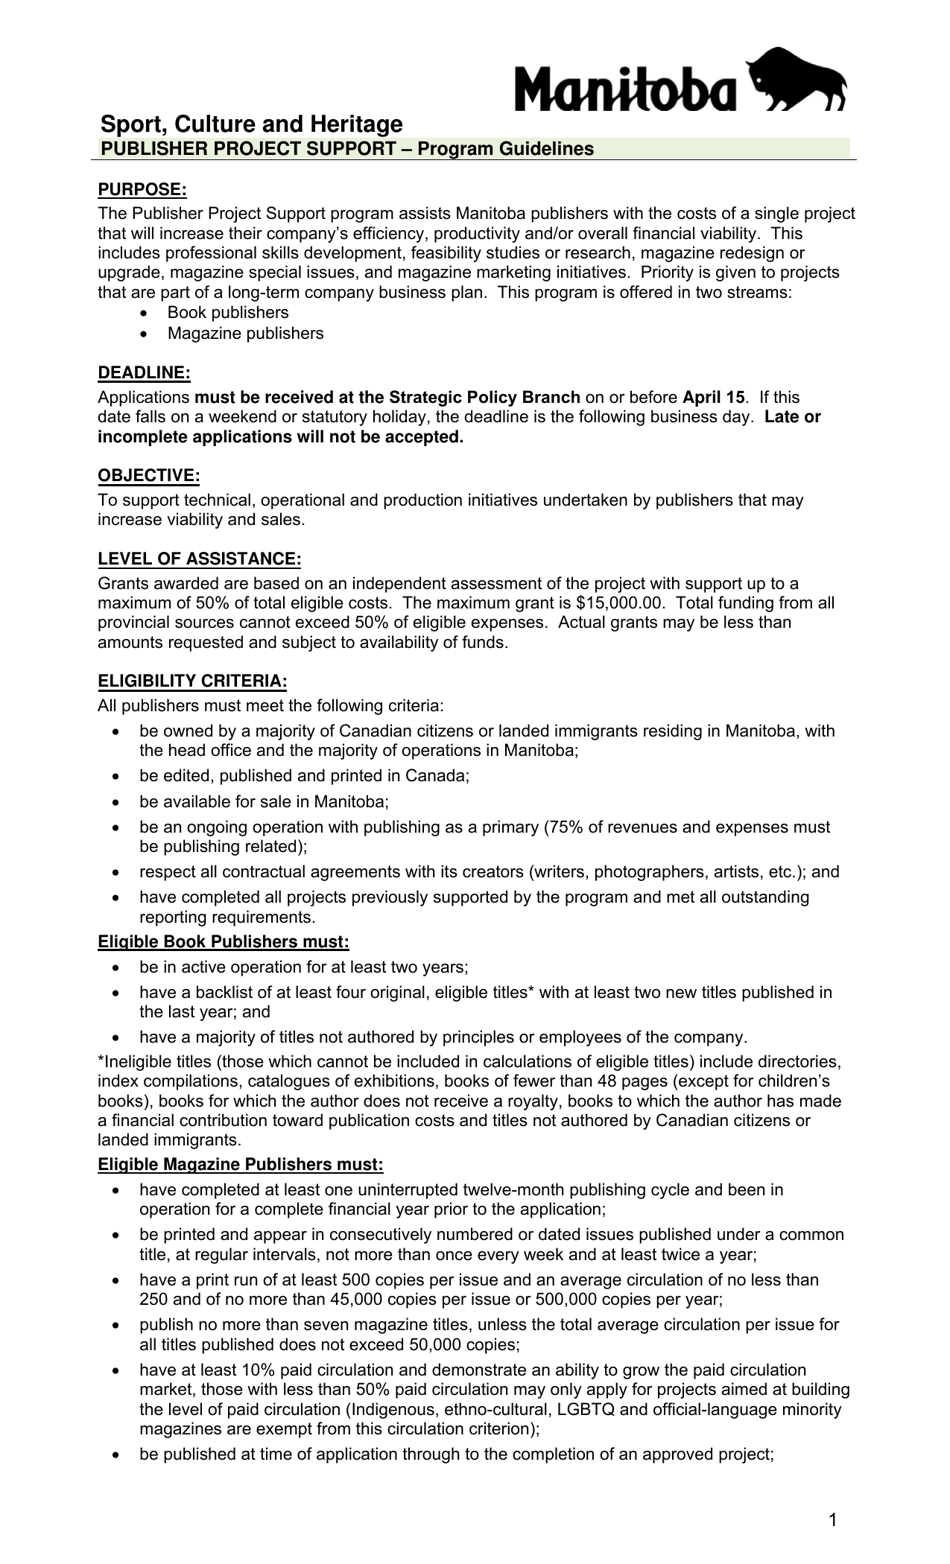 Publisher Project Support - Application - Manitoba, Canada, Page 1